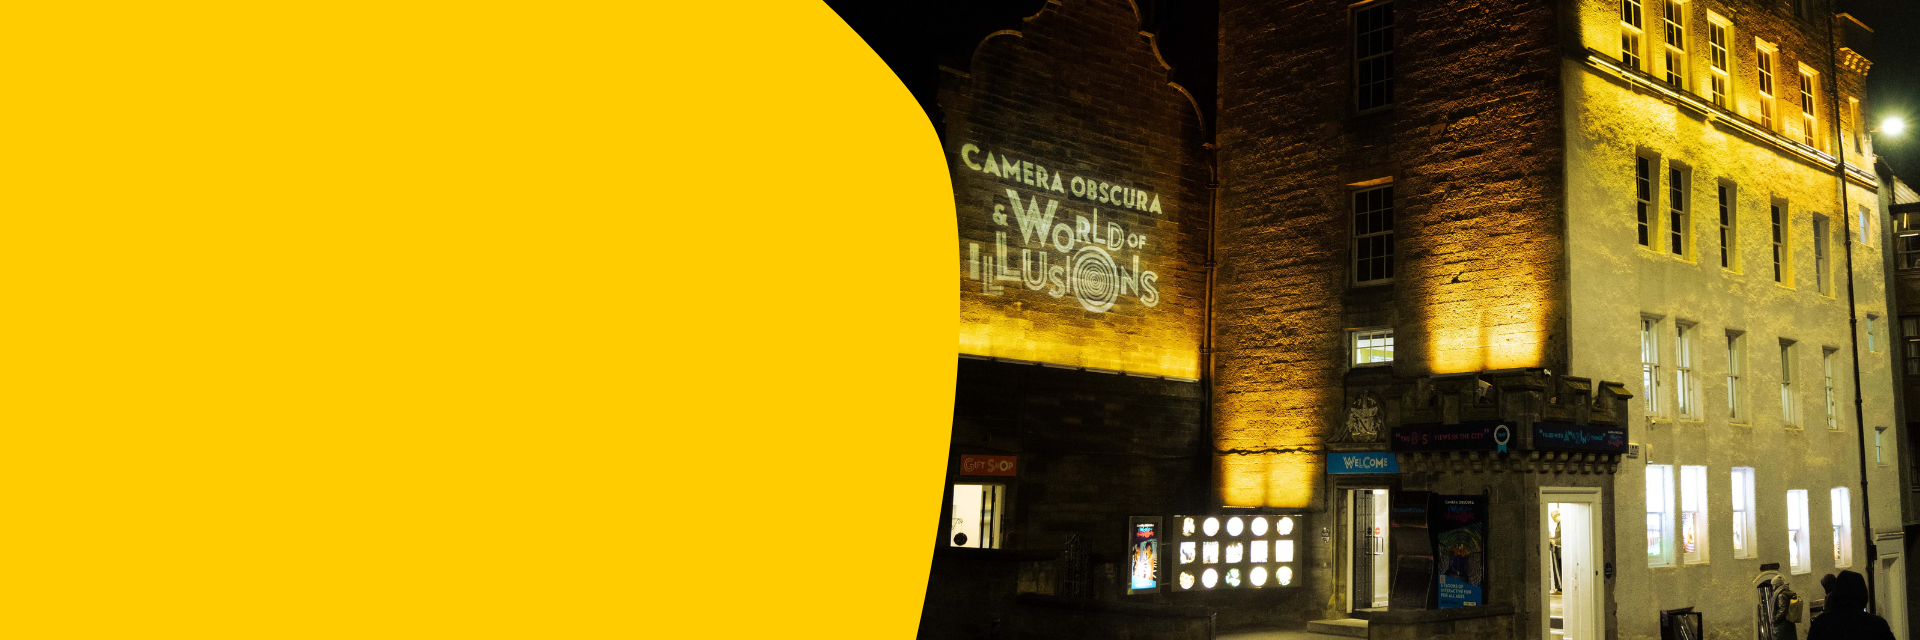 camera obscura lit up in yellow